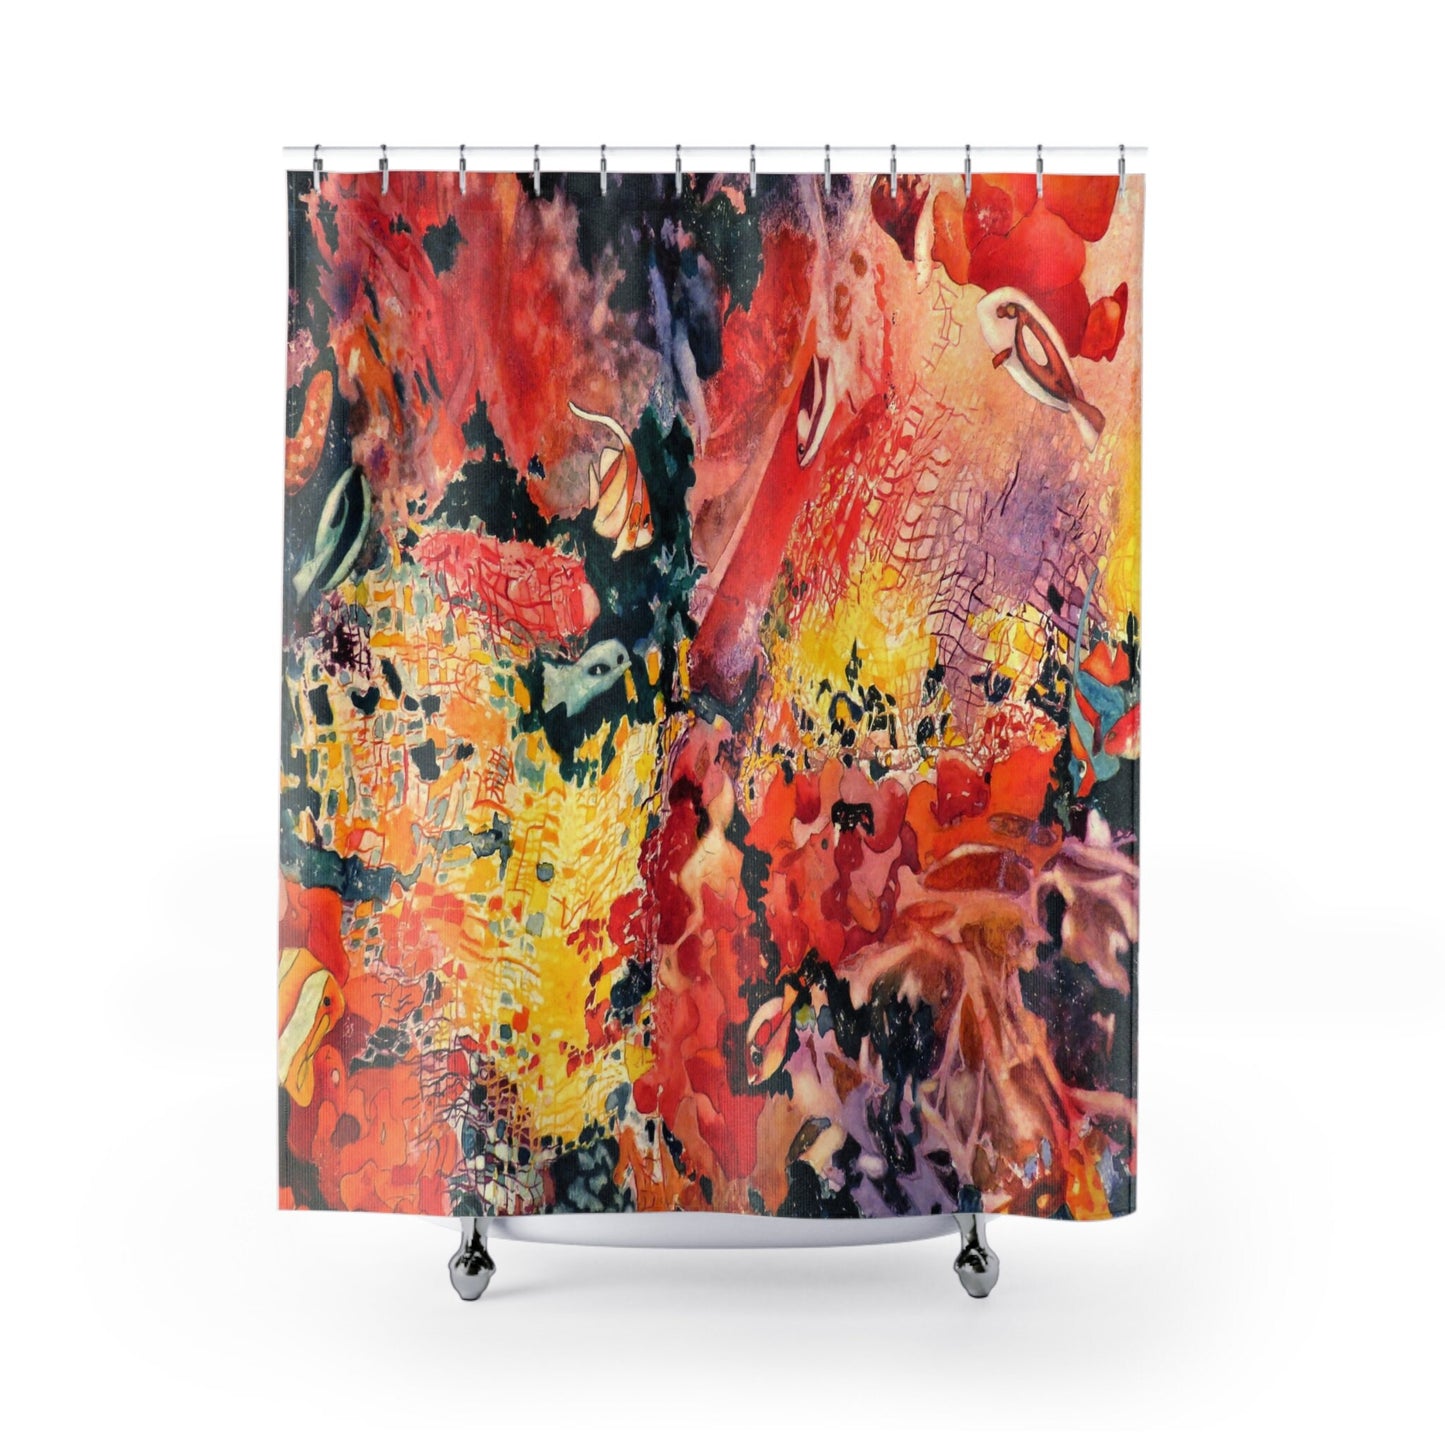 Coral Reef Shower curtain orange shower curtain coral reef abstract art ocean decor fish shower curtain fishes red shower curtain unique